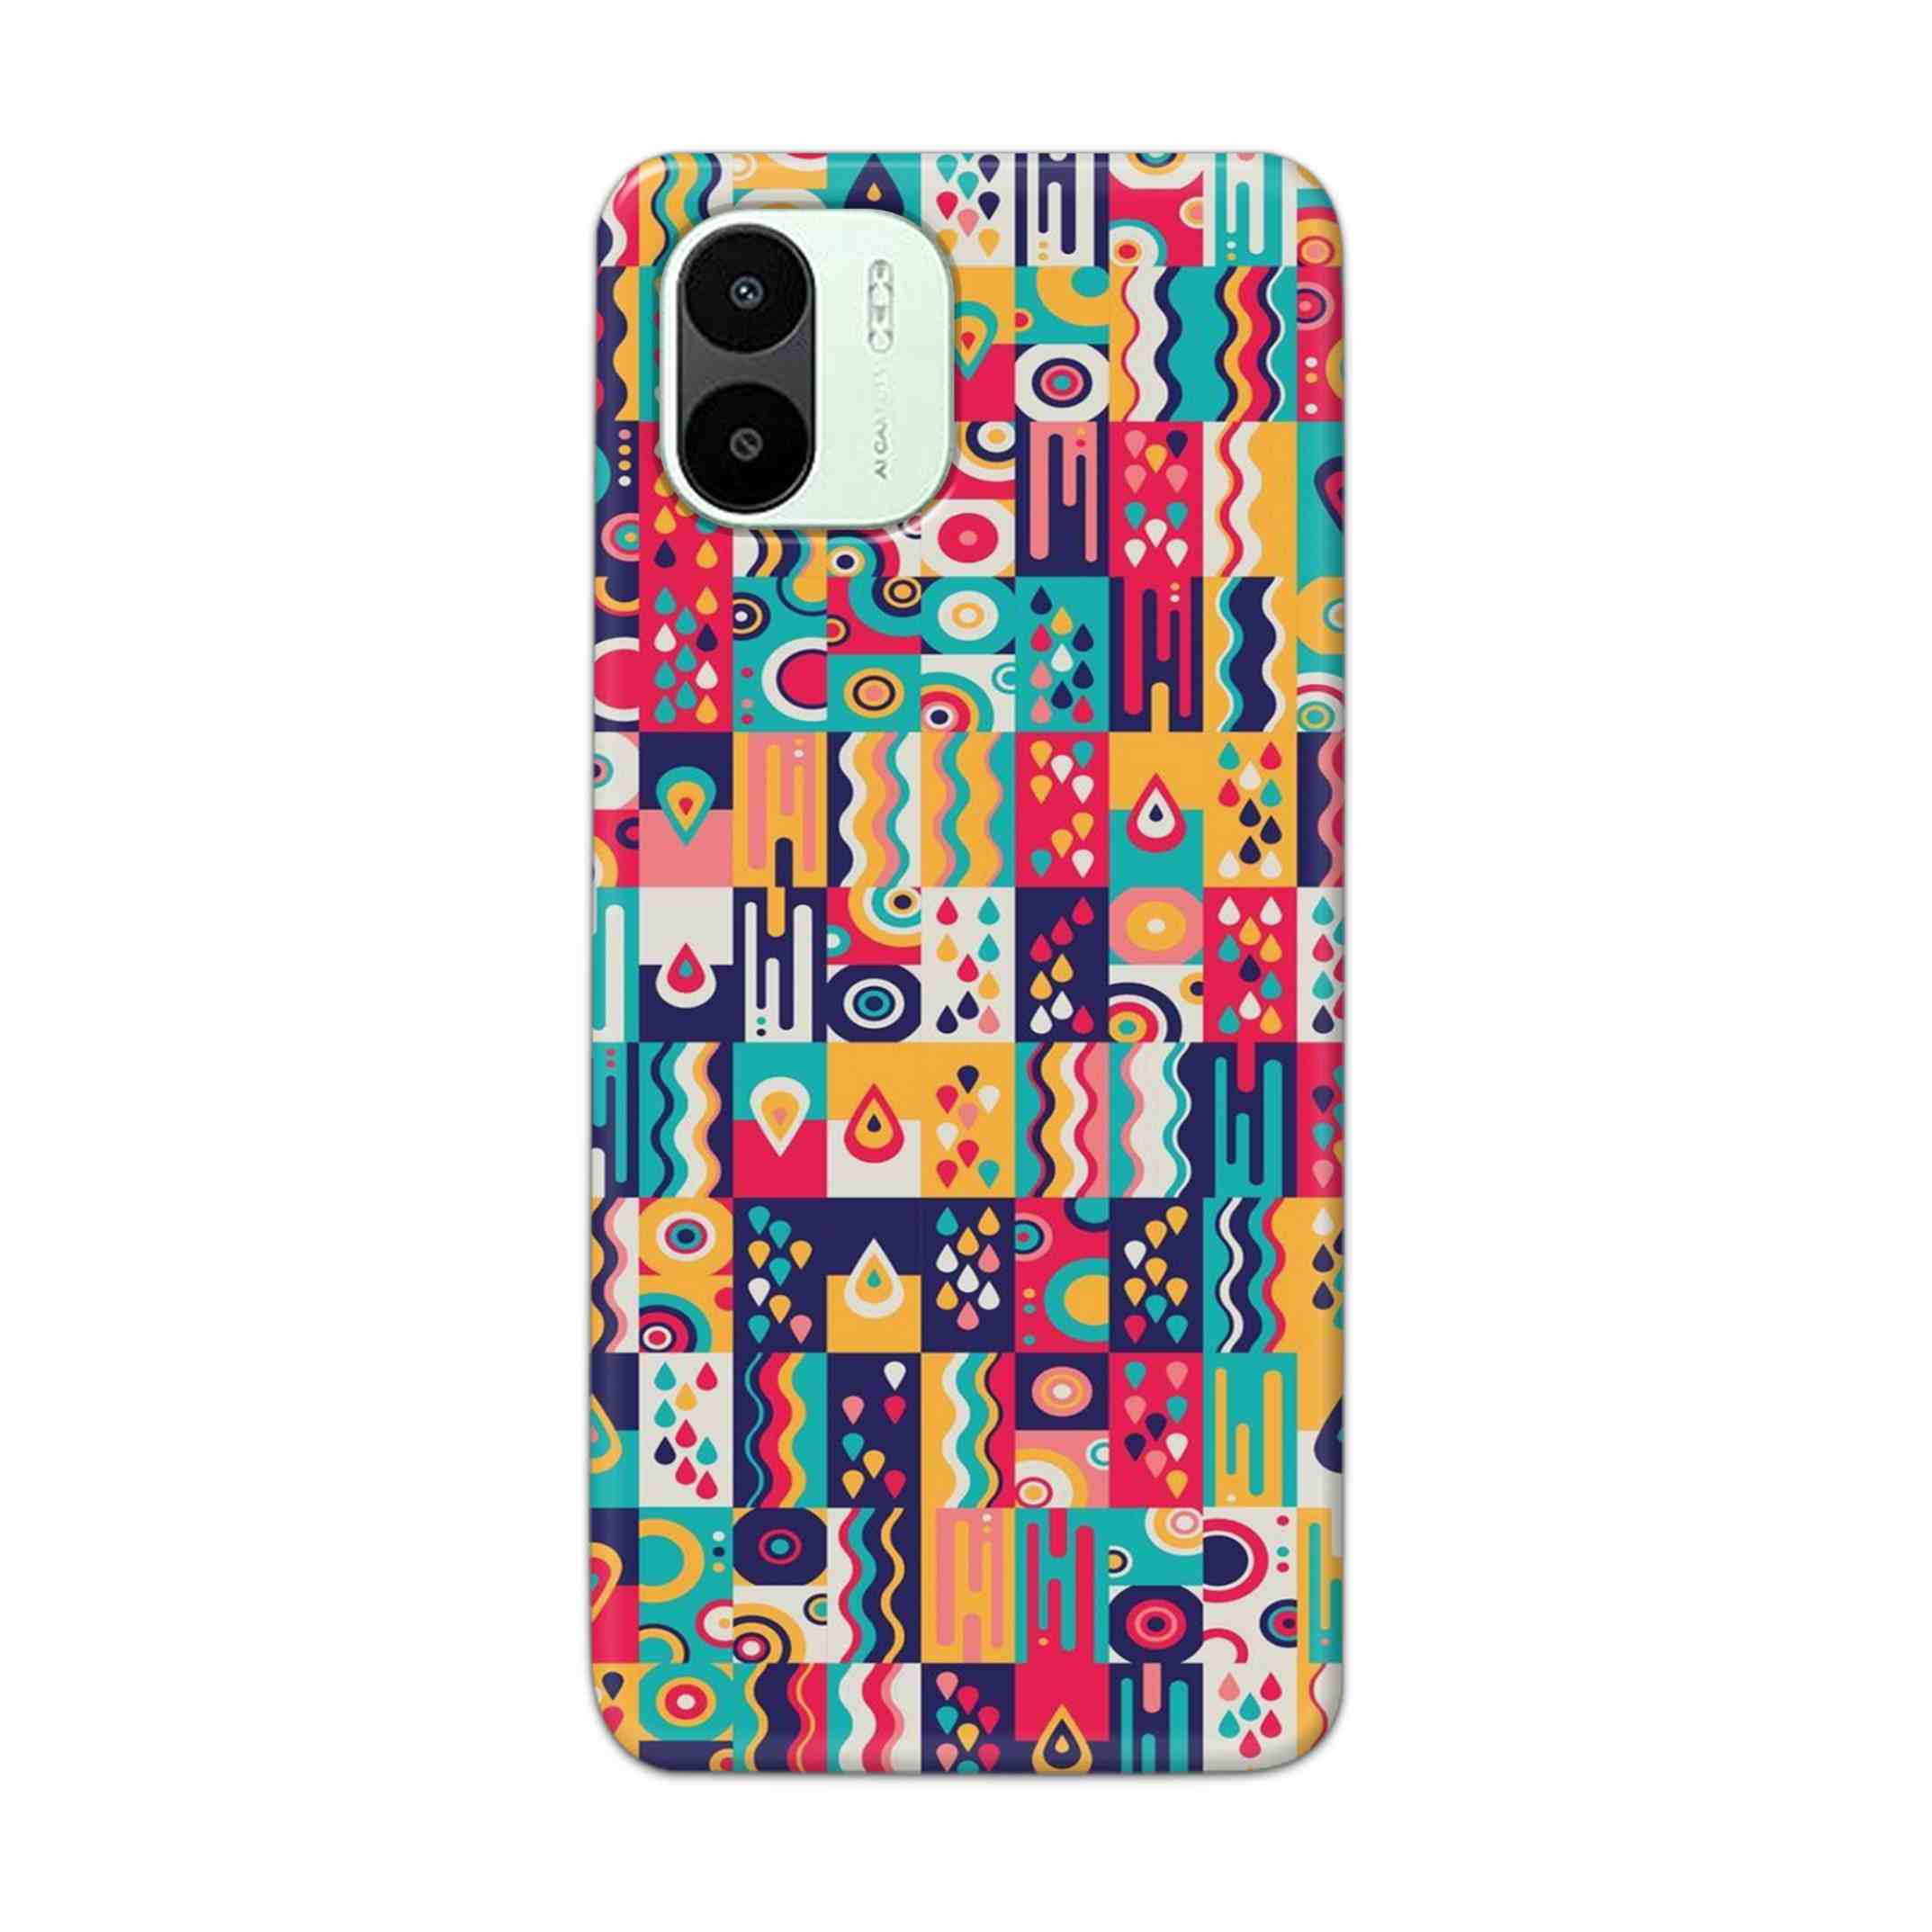 Buy Art Hard Back Mobile Phone Case Cover For Xiaomi Redmi A1 5G Online